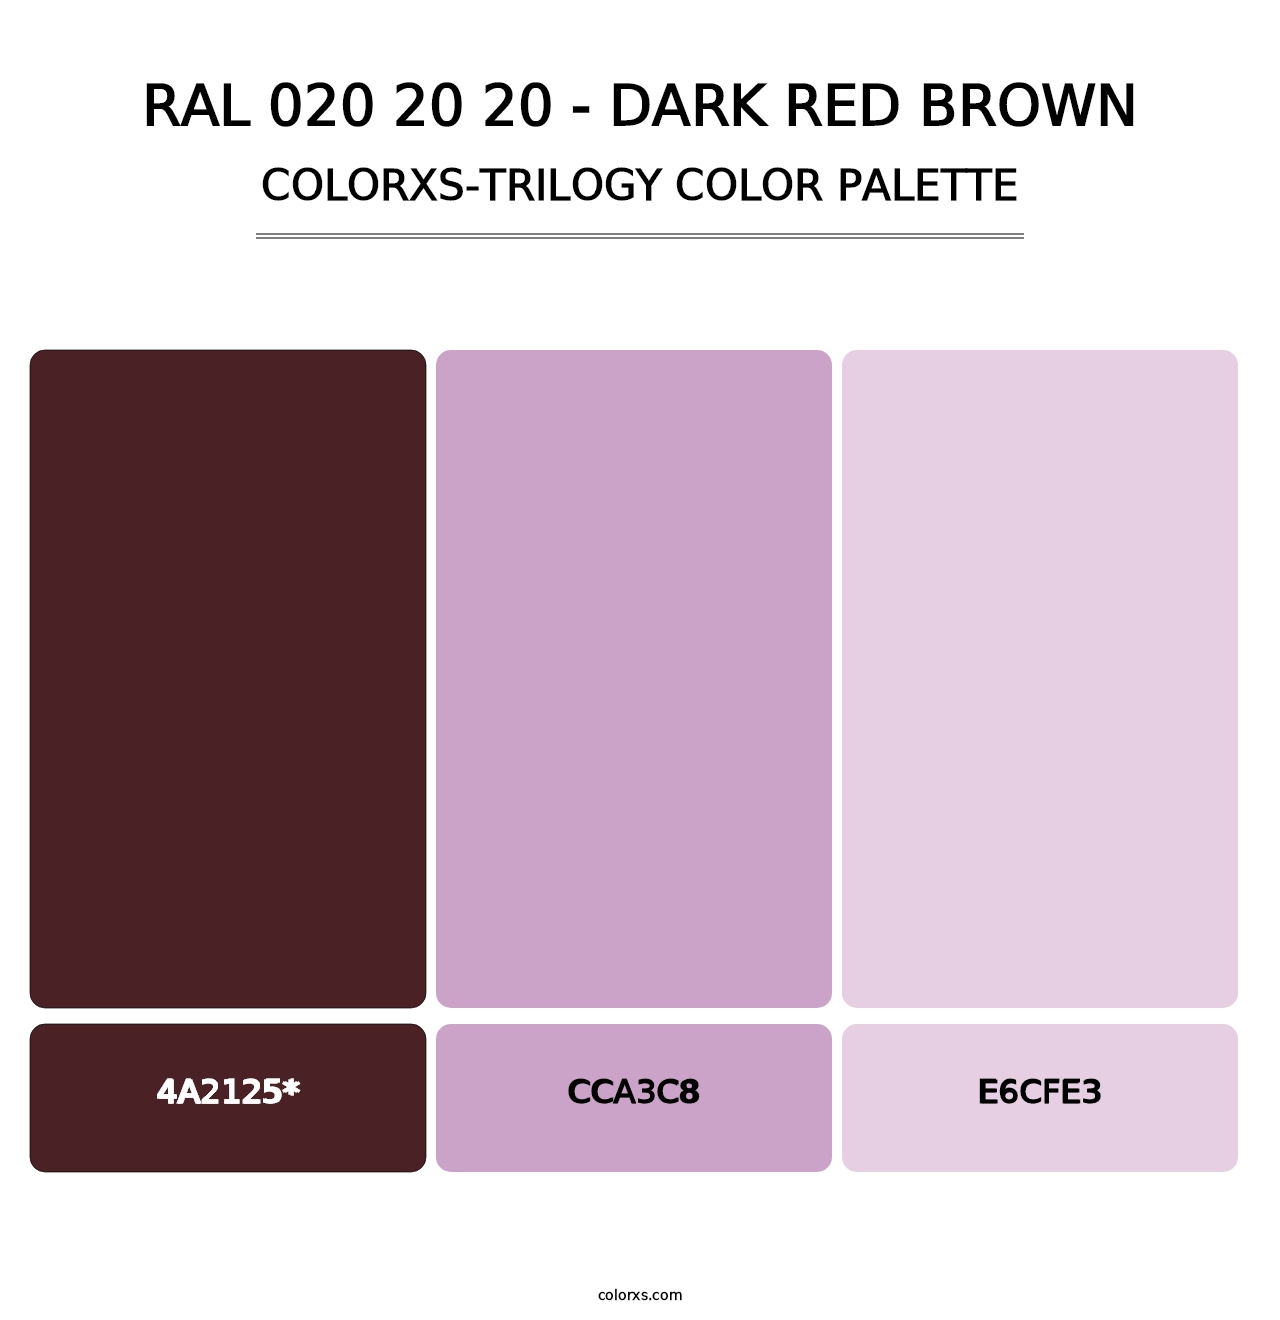 RAL 020 20 20 - Dark Red Brown - Colorxs Trilogy Palette